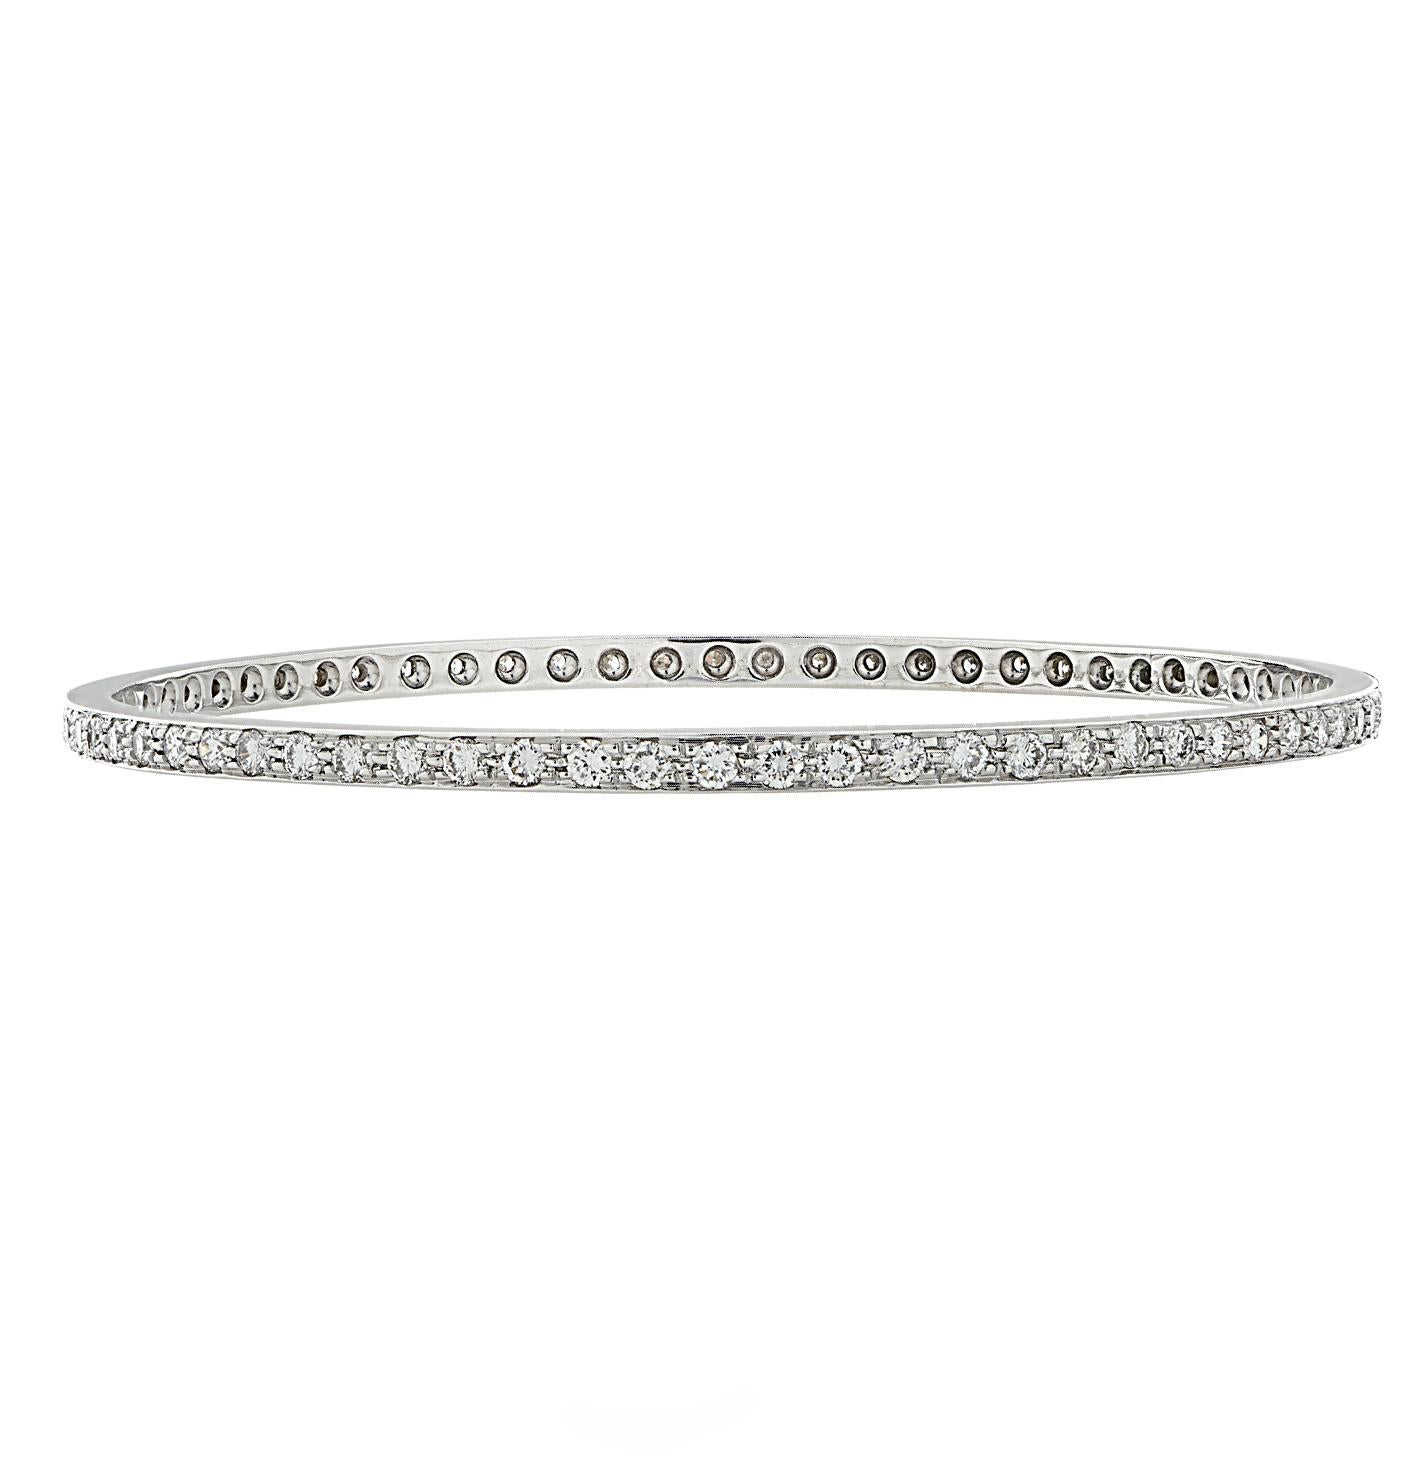 Stunning bangle bracelet crafted in 18 karat white gold, featuring 68 round brilliant cut diamonds weighing approximately 3 carats total, G color, VS clarity. This gorgeous diamond encrusted bangle measures 2.3 inches in diameter and .1 of an inch